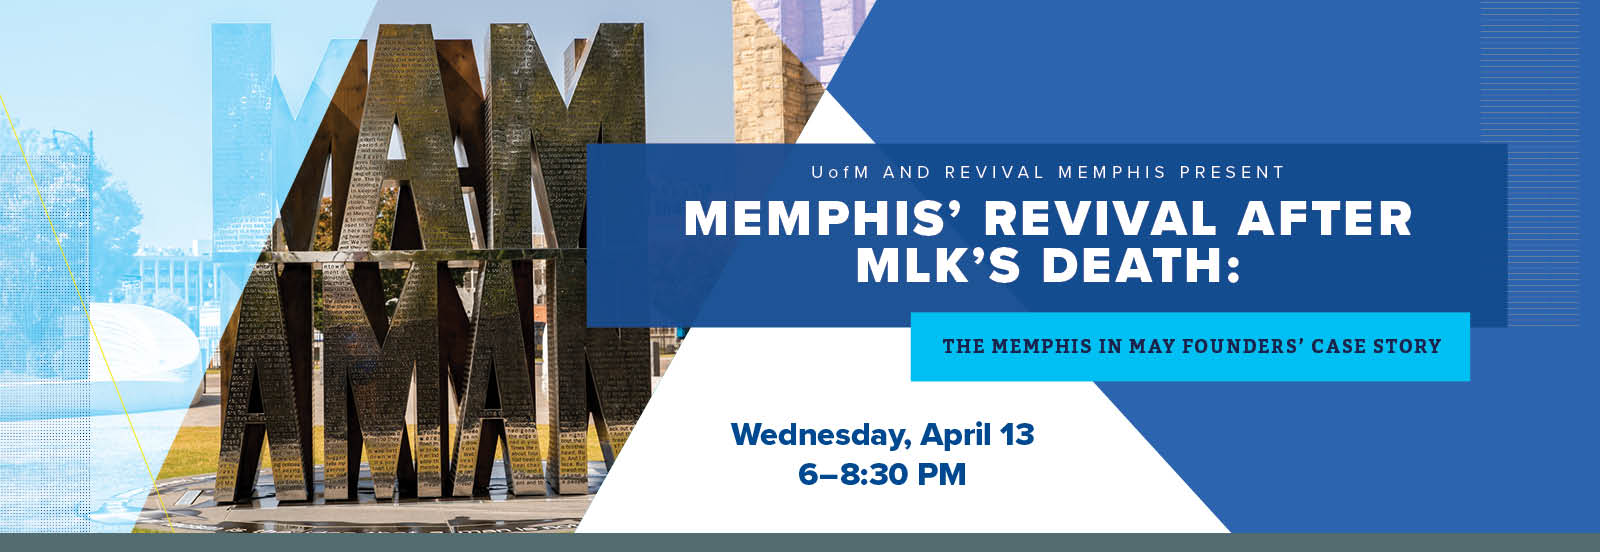 UofM and Revival Memphis present “Memphis’ Revival After the MLK Death: The Memphis in May Founders story”  Wednesday, April 13   |   6:00 – 8:30 pm